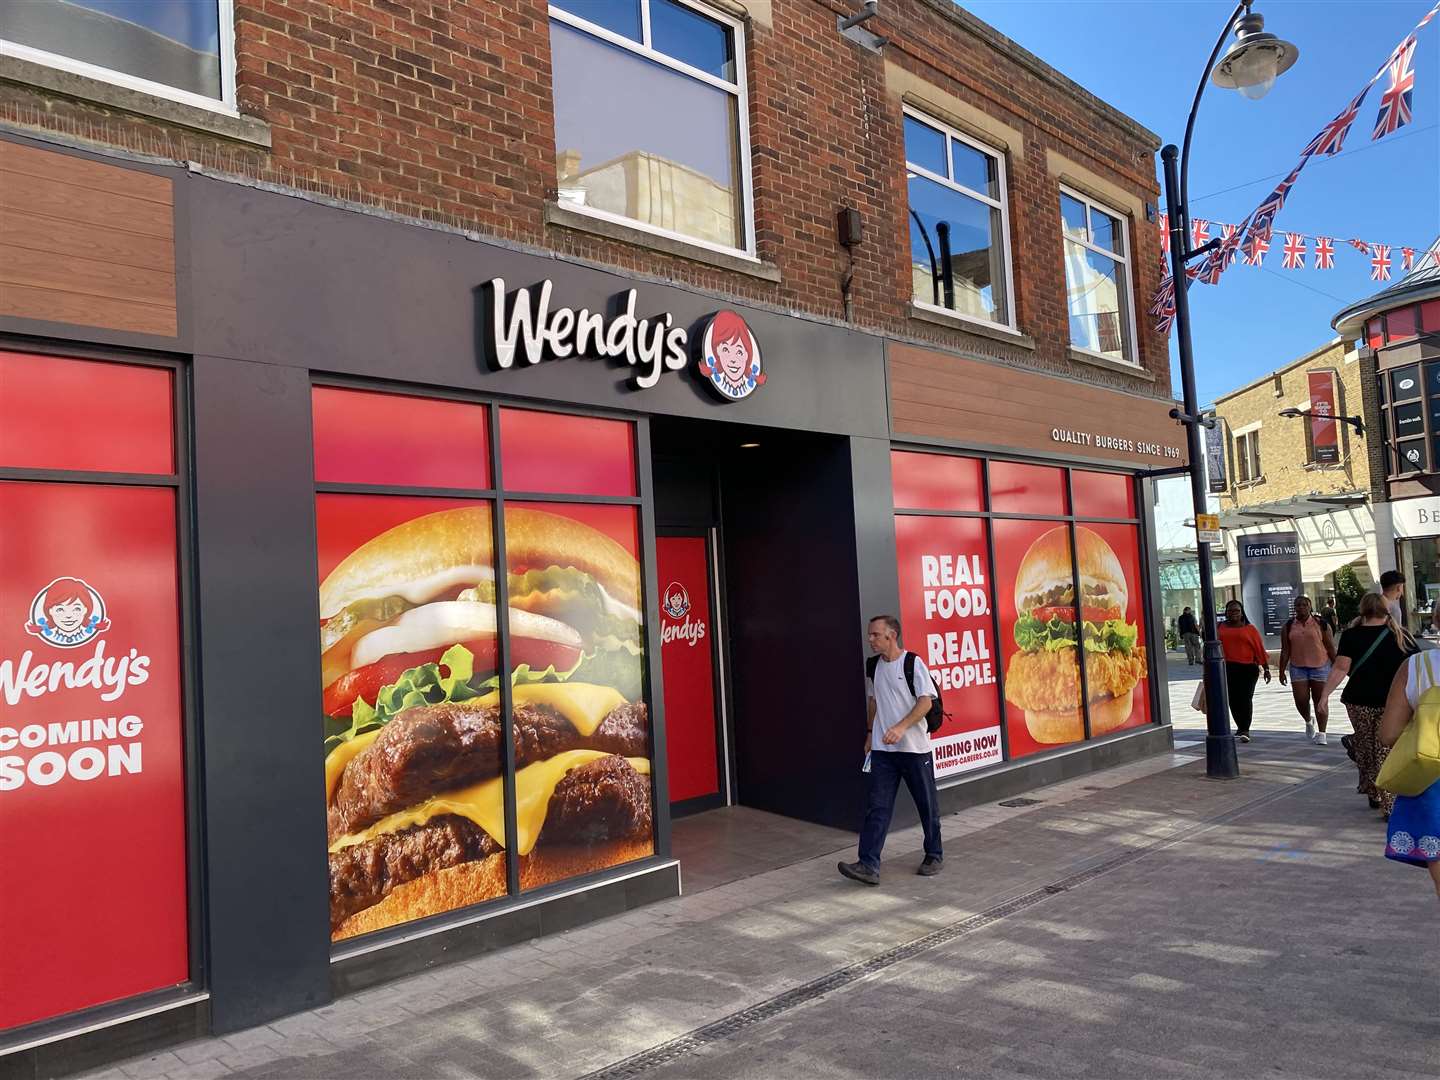 Wendy's in Week Street, Maidstone, will open next Tuesday